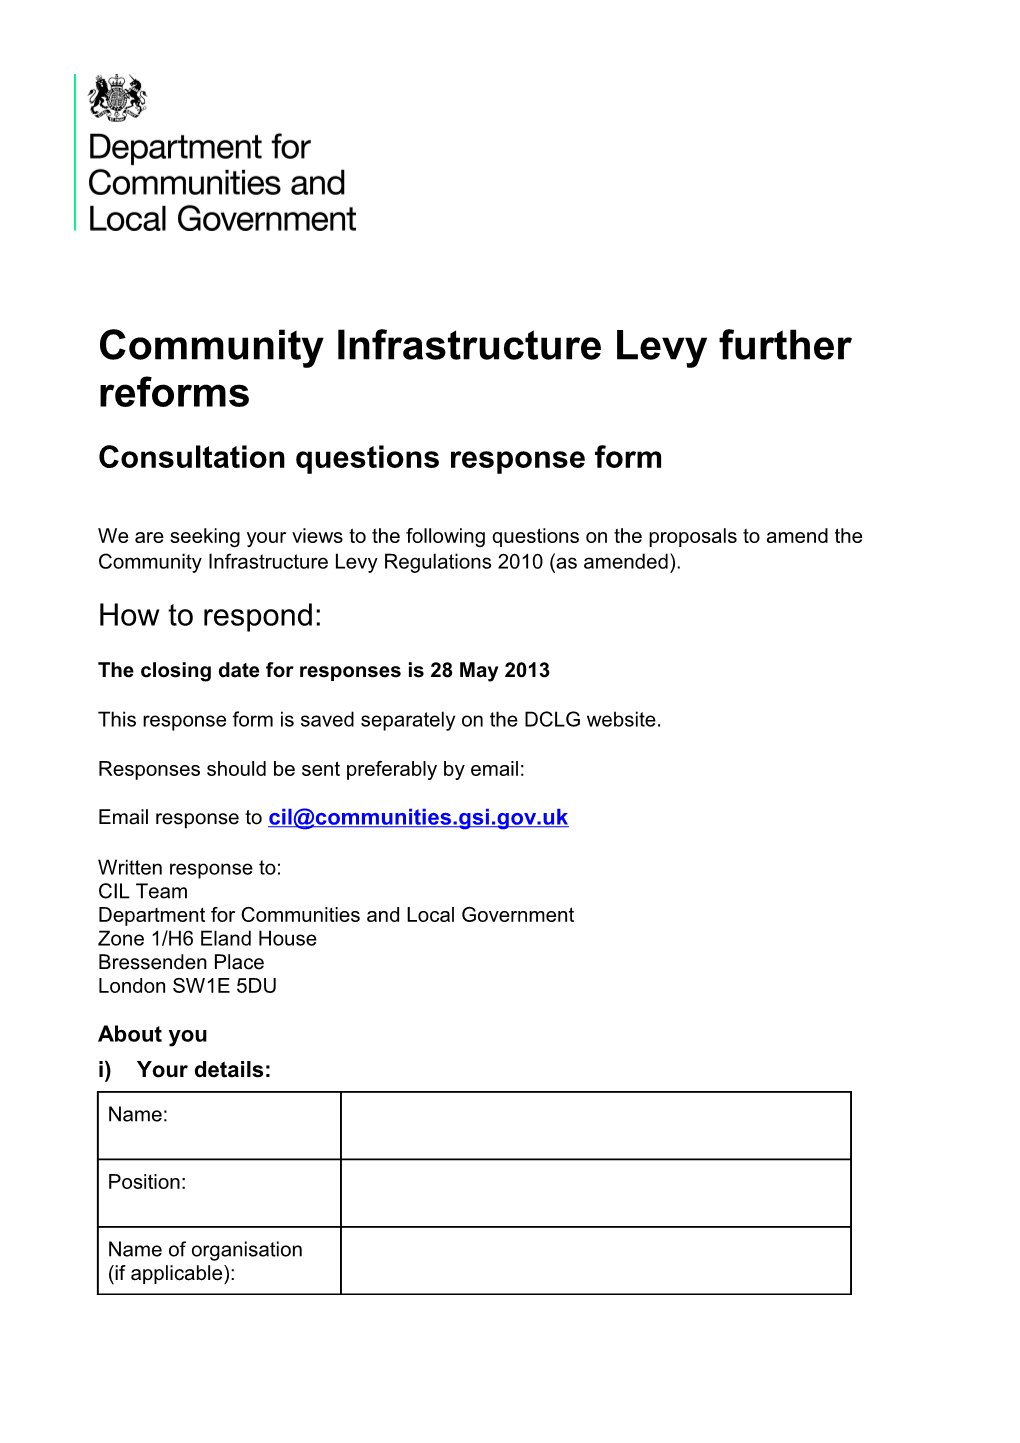 Community Infrastructure Levy Further Reforms: Consultation Questions Response Form